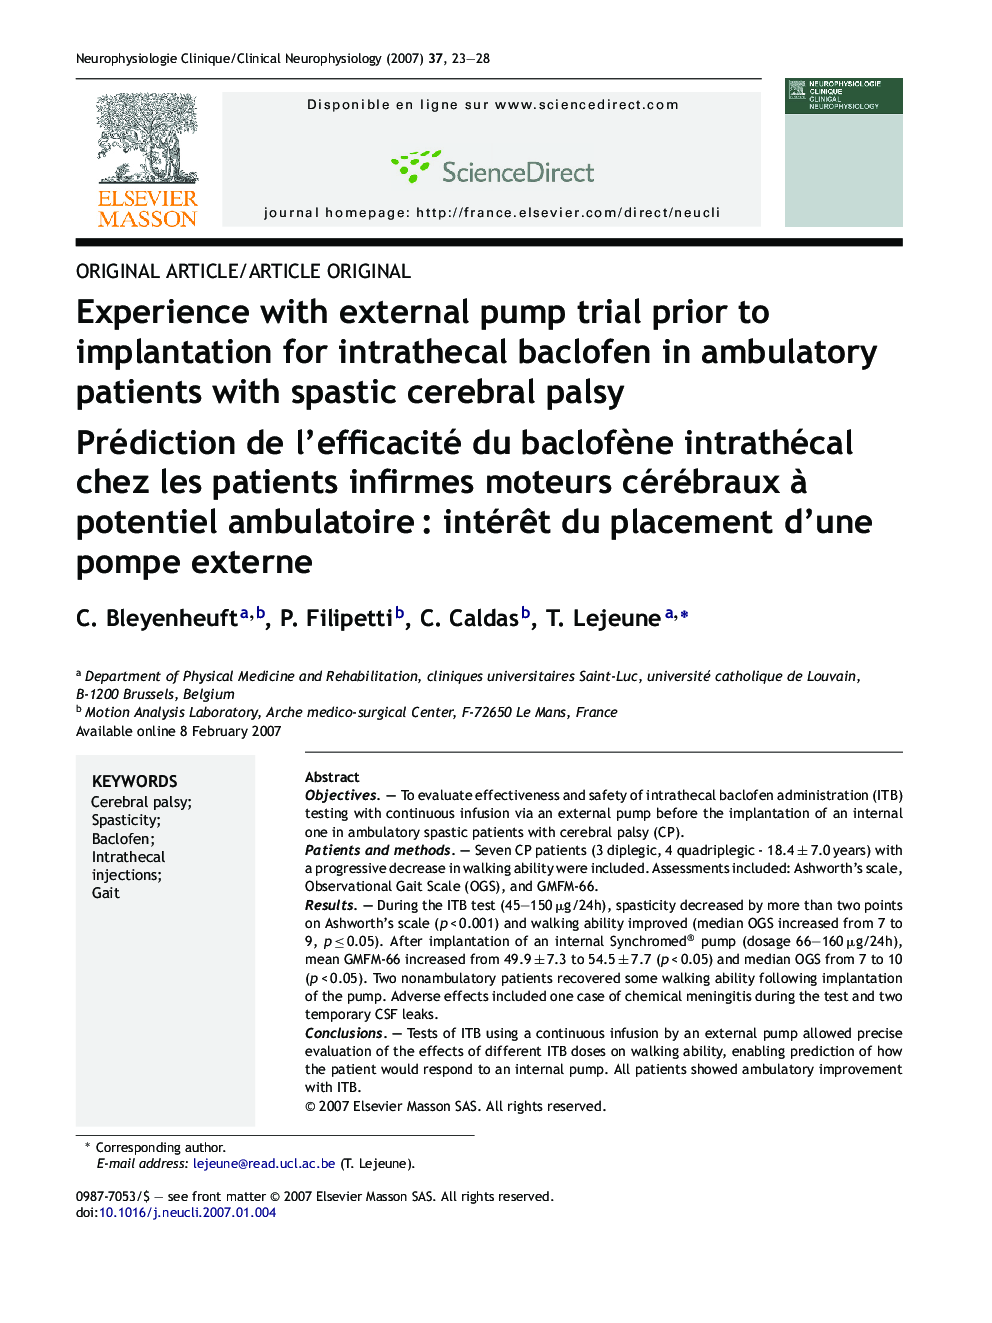 Experience with external pump trial prior to implantation for intrathecal baclofen in ambulatory patients with spastic cerebral palsy